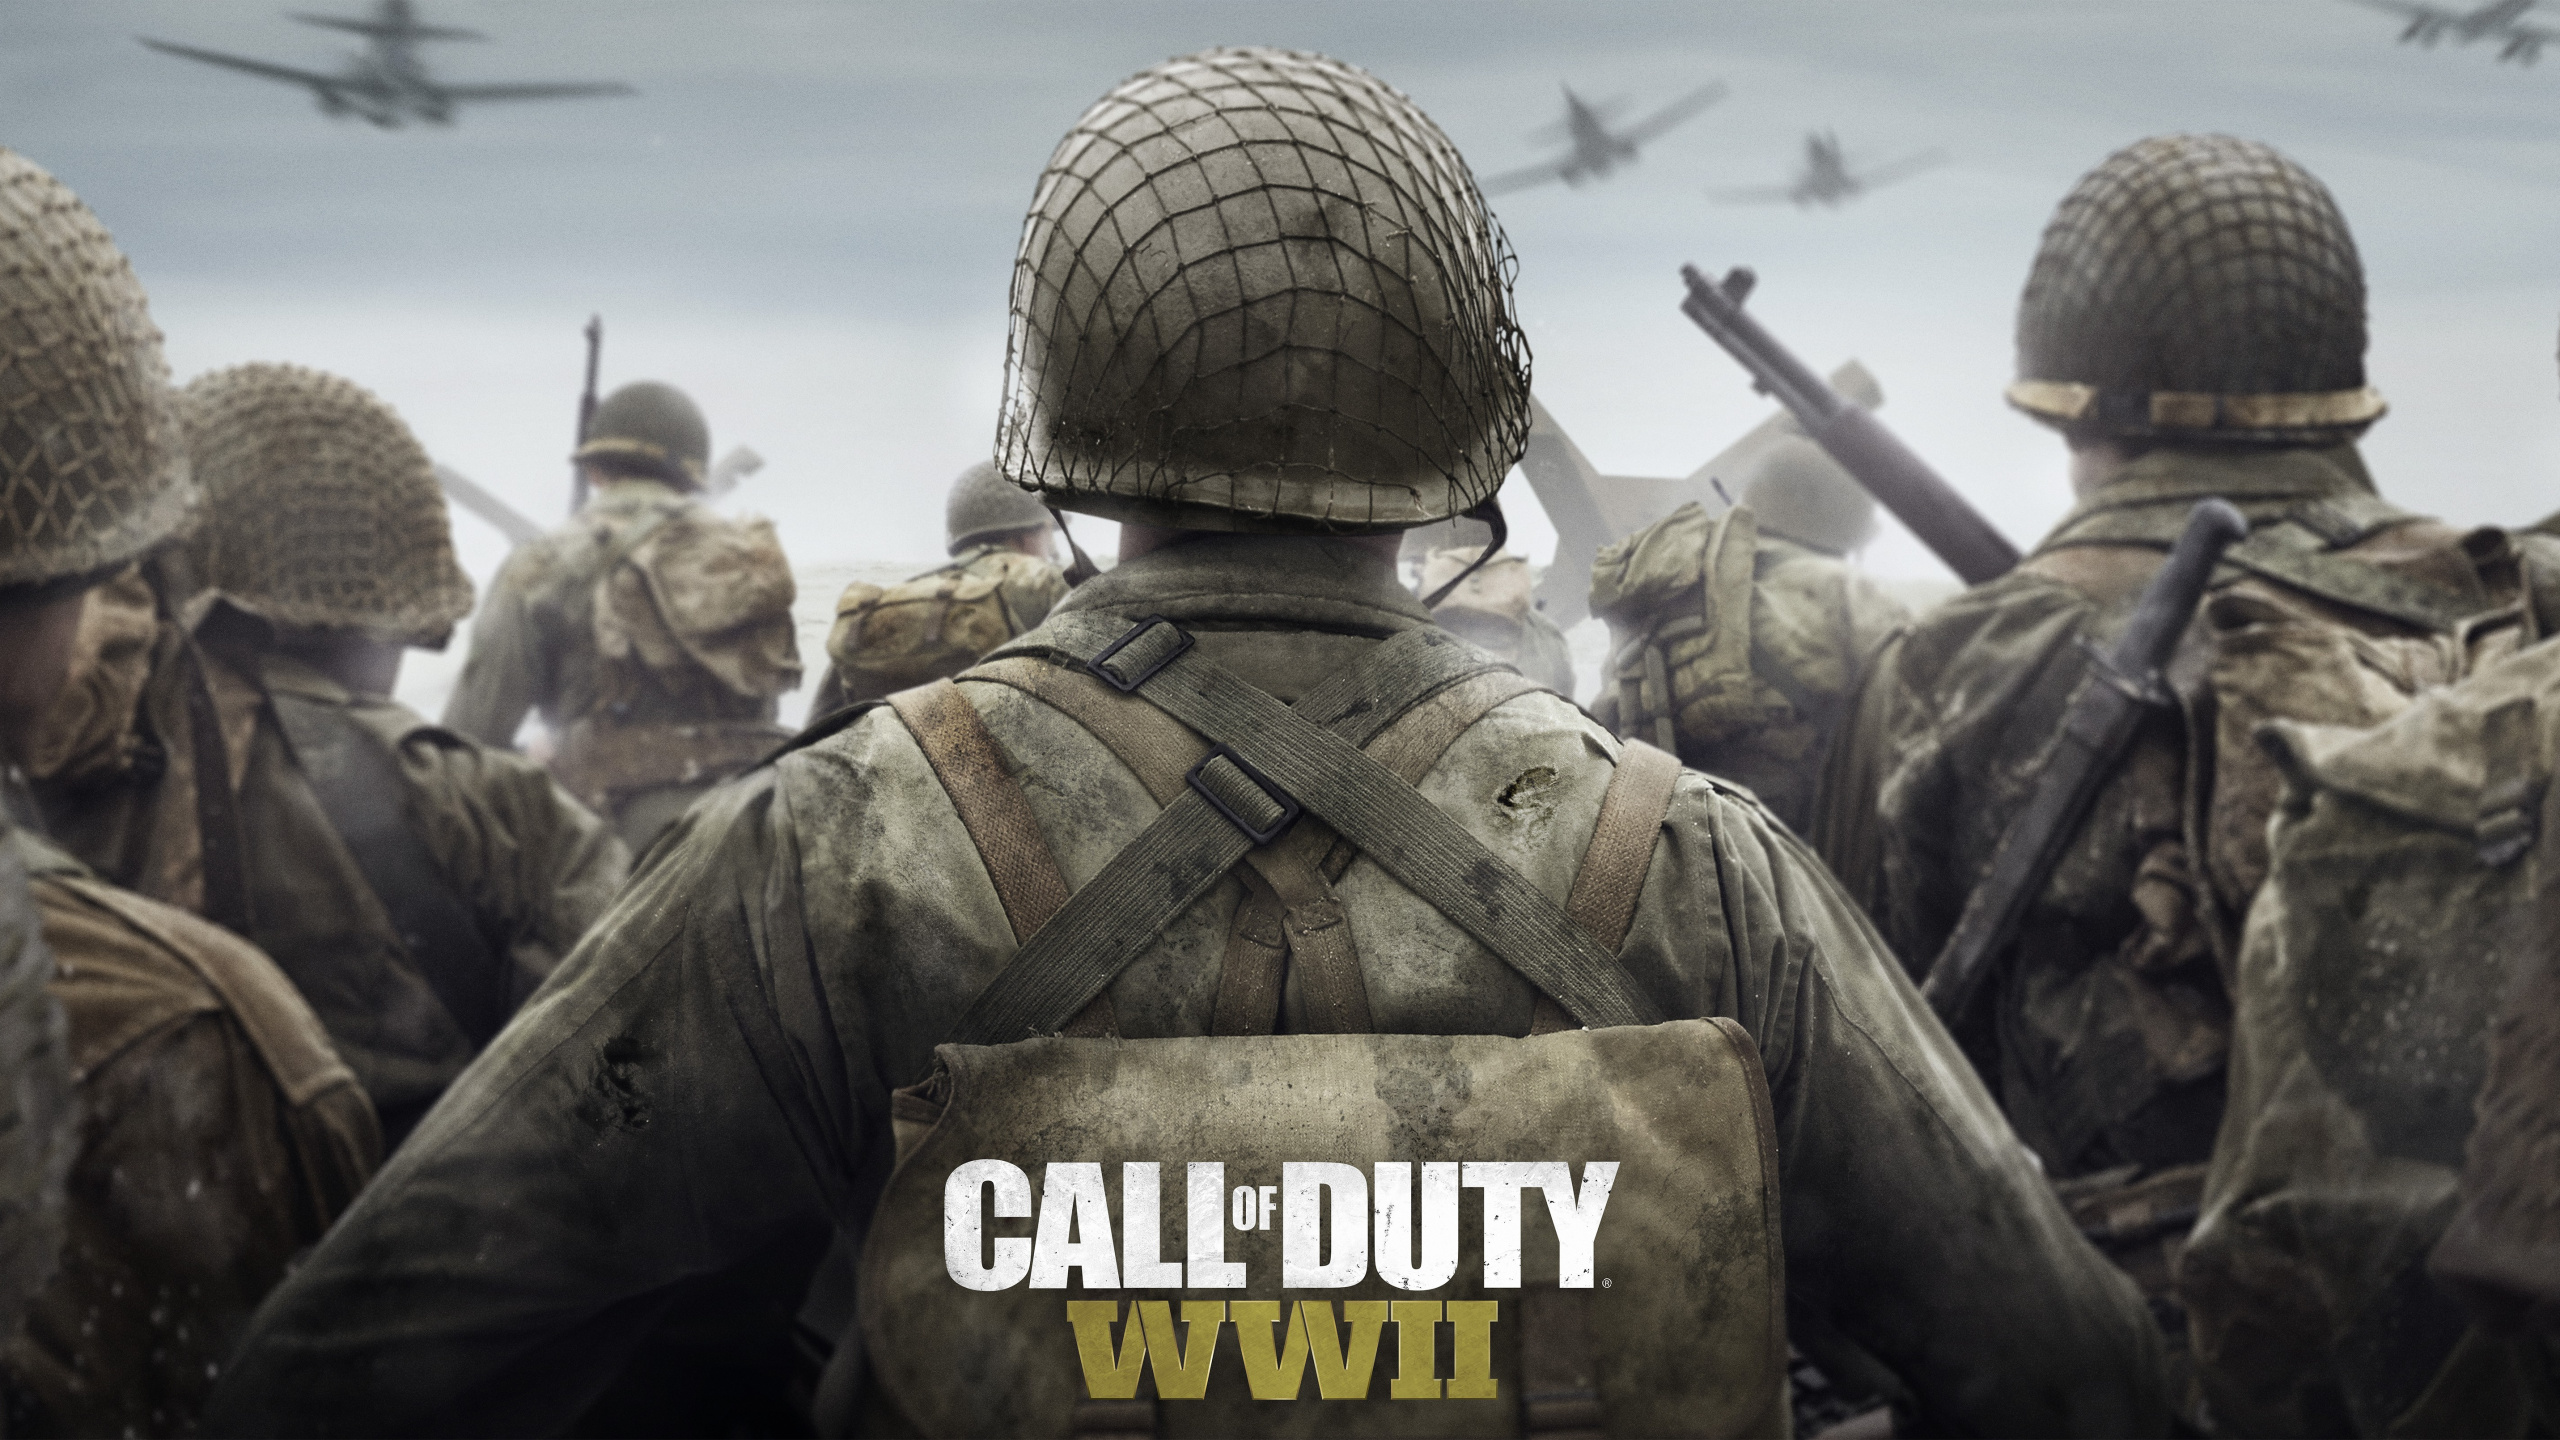 Call of Duty Ww2, Call of Duty WWII, Activision, Sledgehammer Games, Soldier. Wallpaper in 2560x1440 Resolution